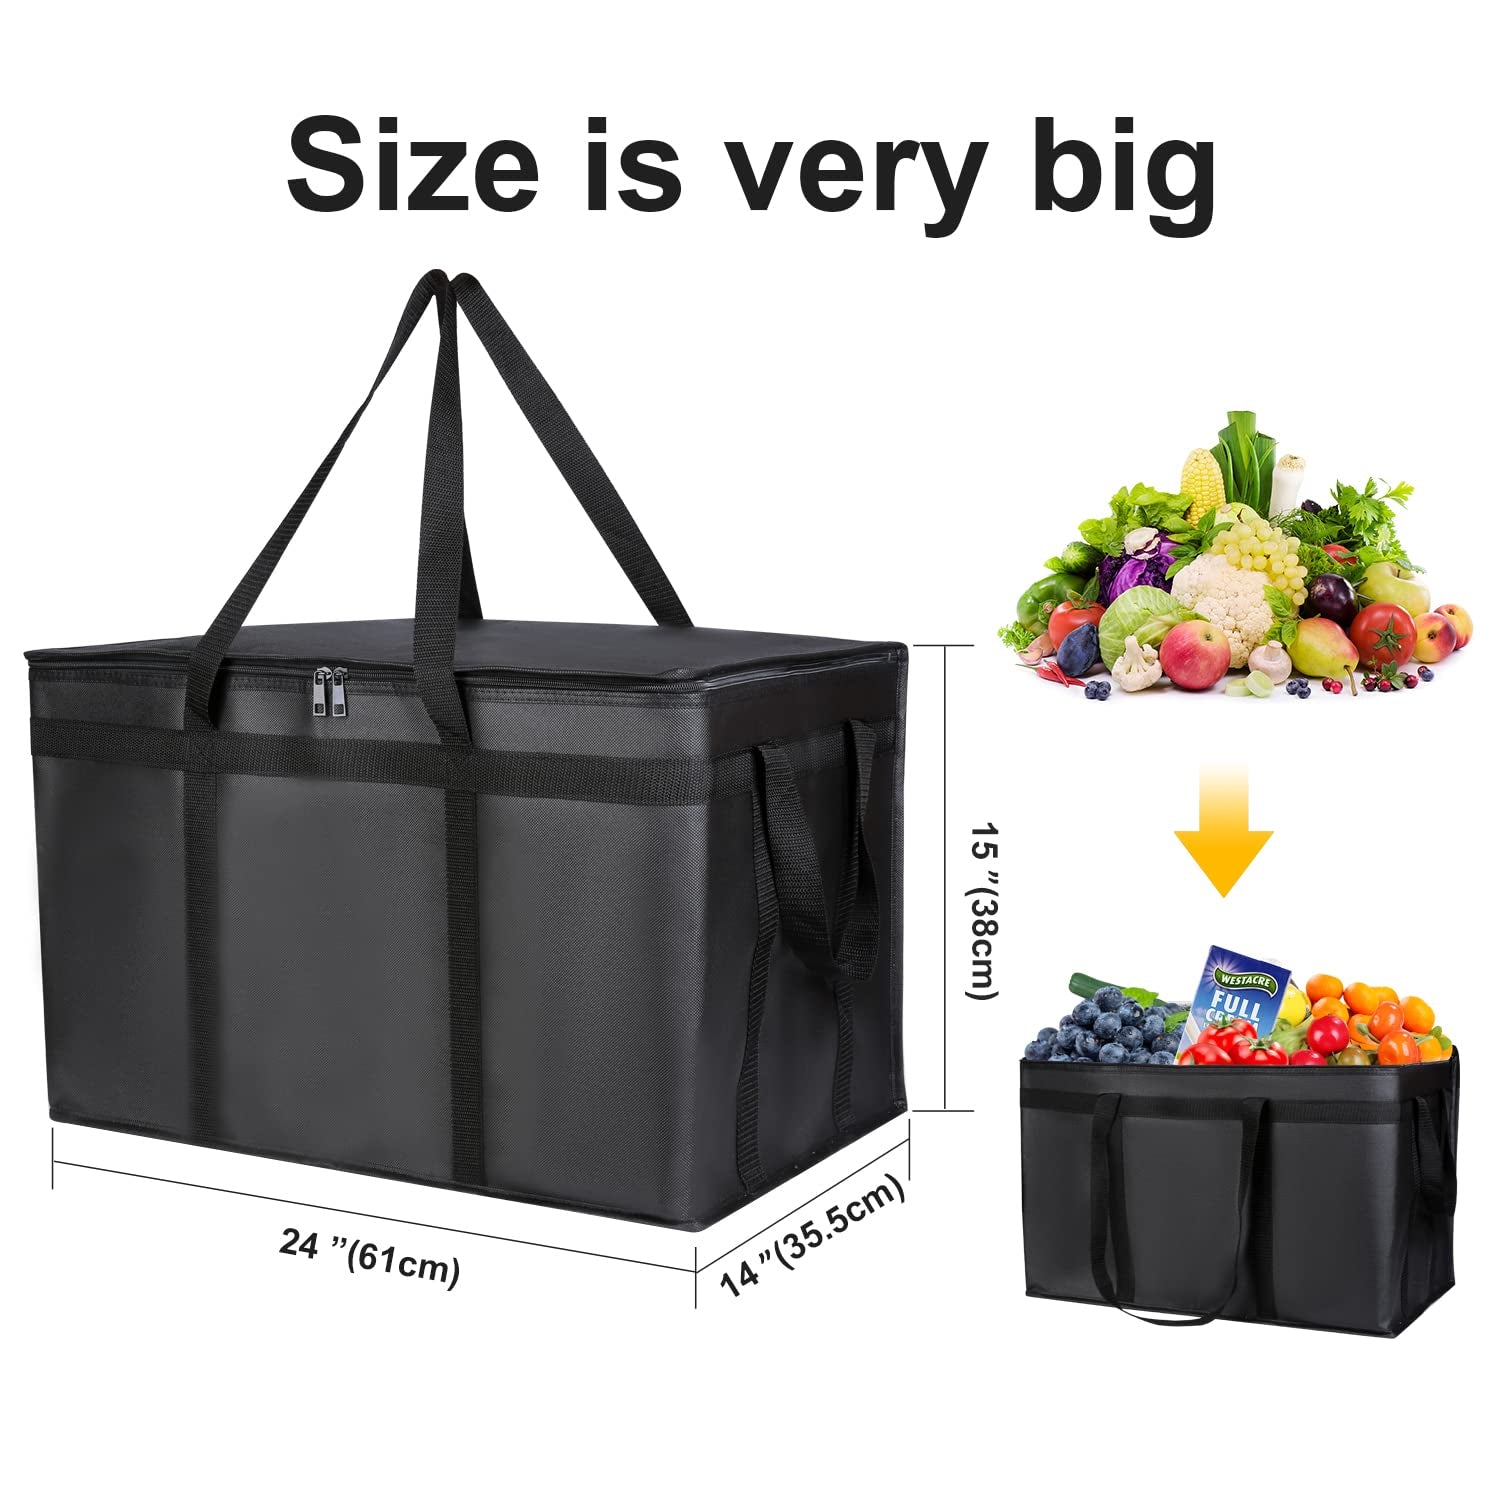 Insulated Food Delivery Bag Cooler Bags Keep Food Warm Catering Therma for Doordash Catering Cooler Bags Keep Food Warm Catering Therma Catering Shopper Accessories Hot XL XXL Pizza